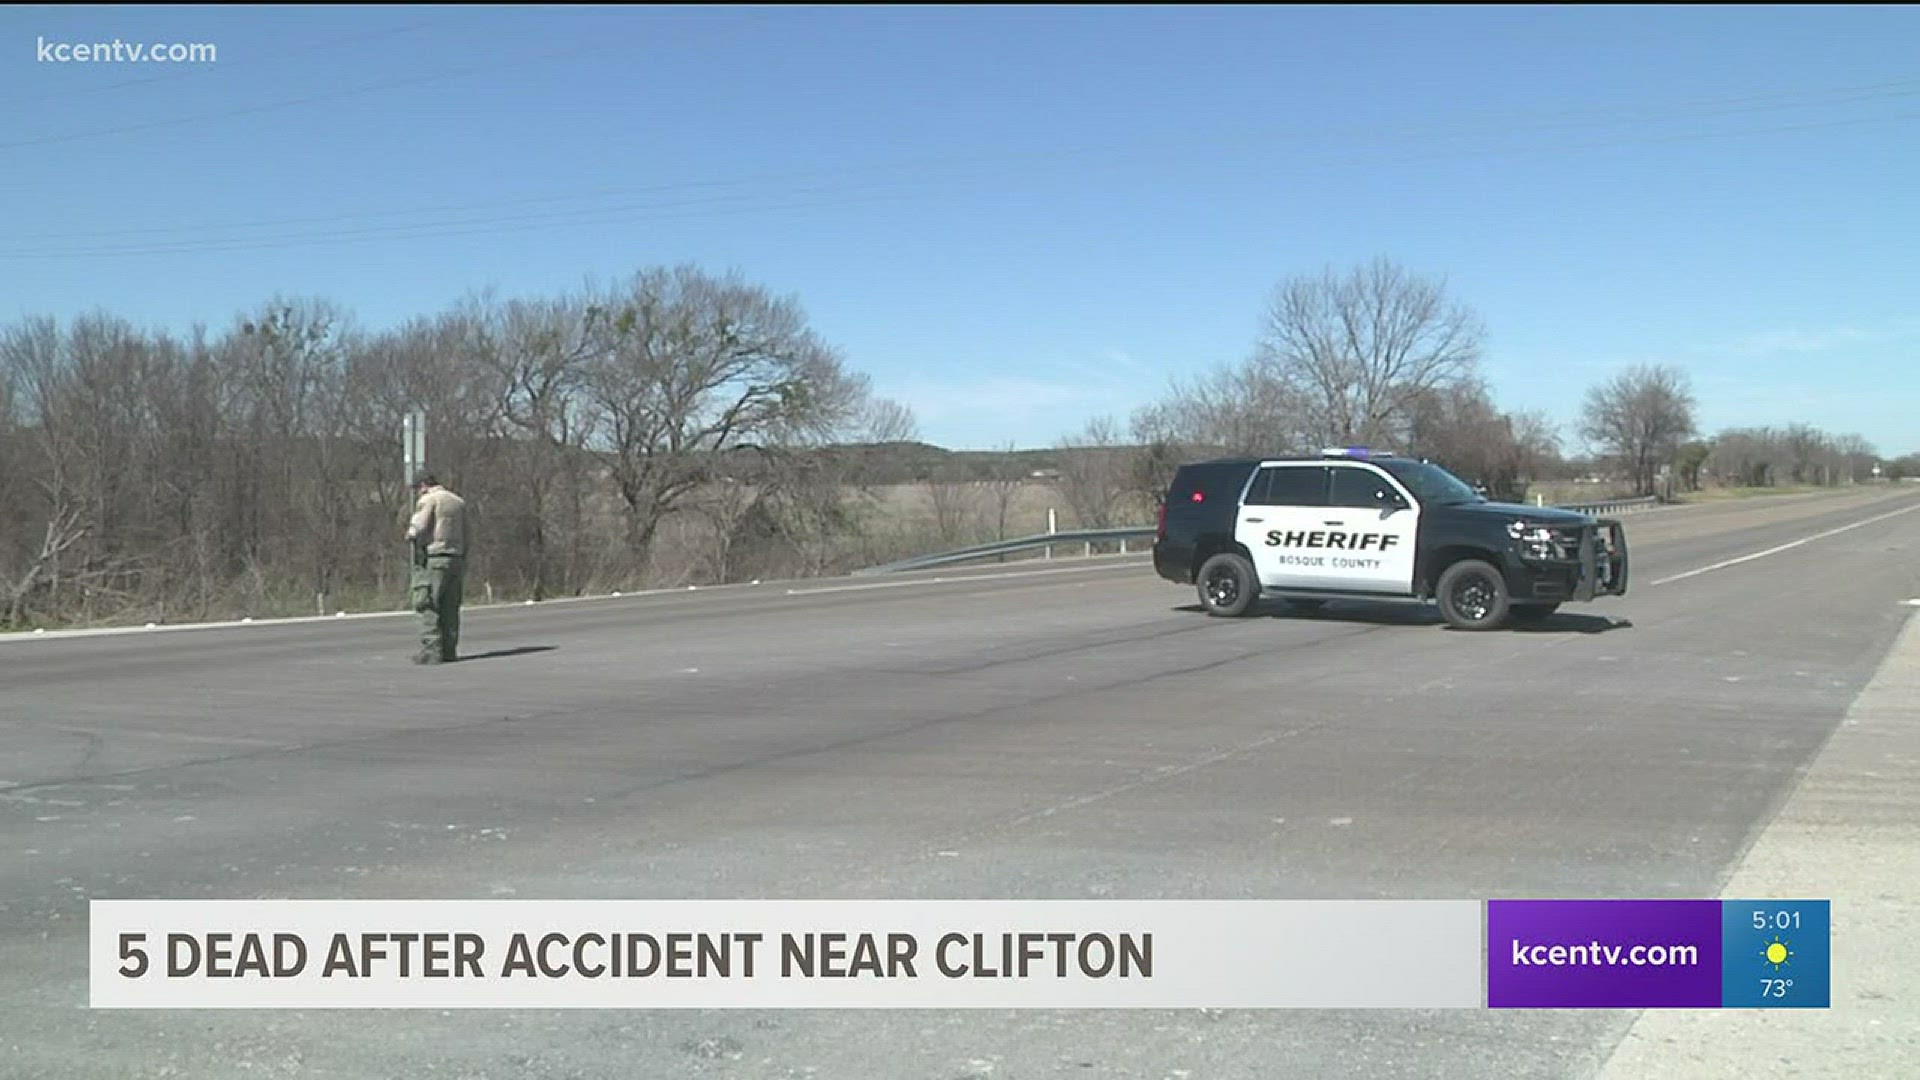 Five people are dead after an accident this morning near Clifton.